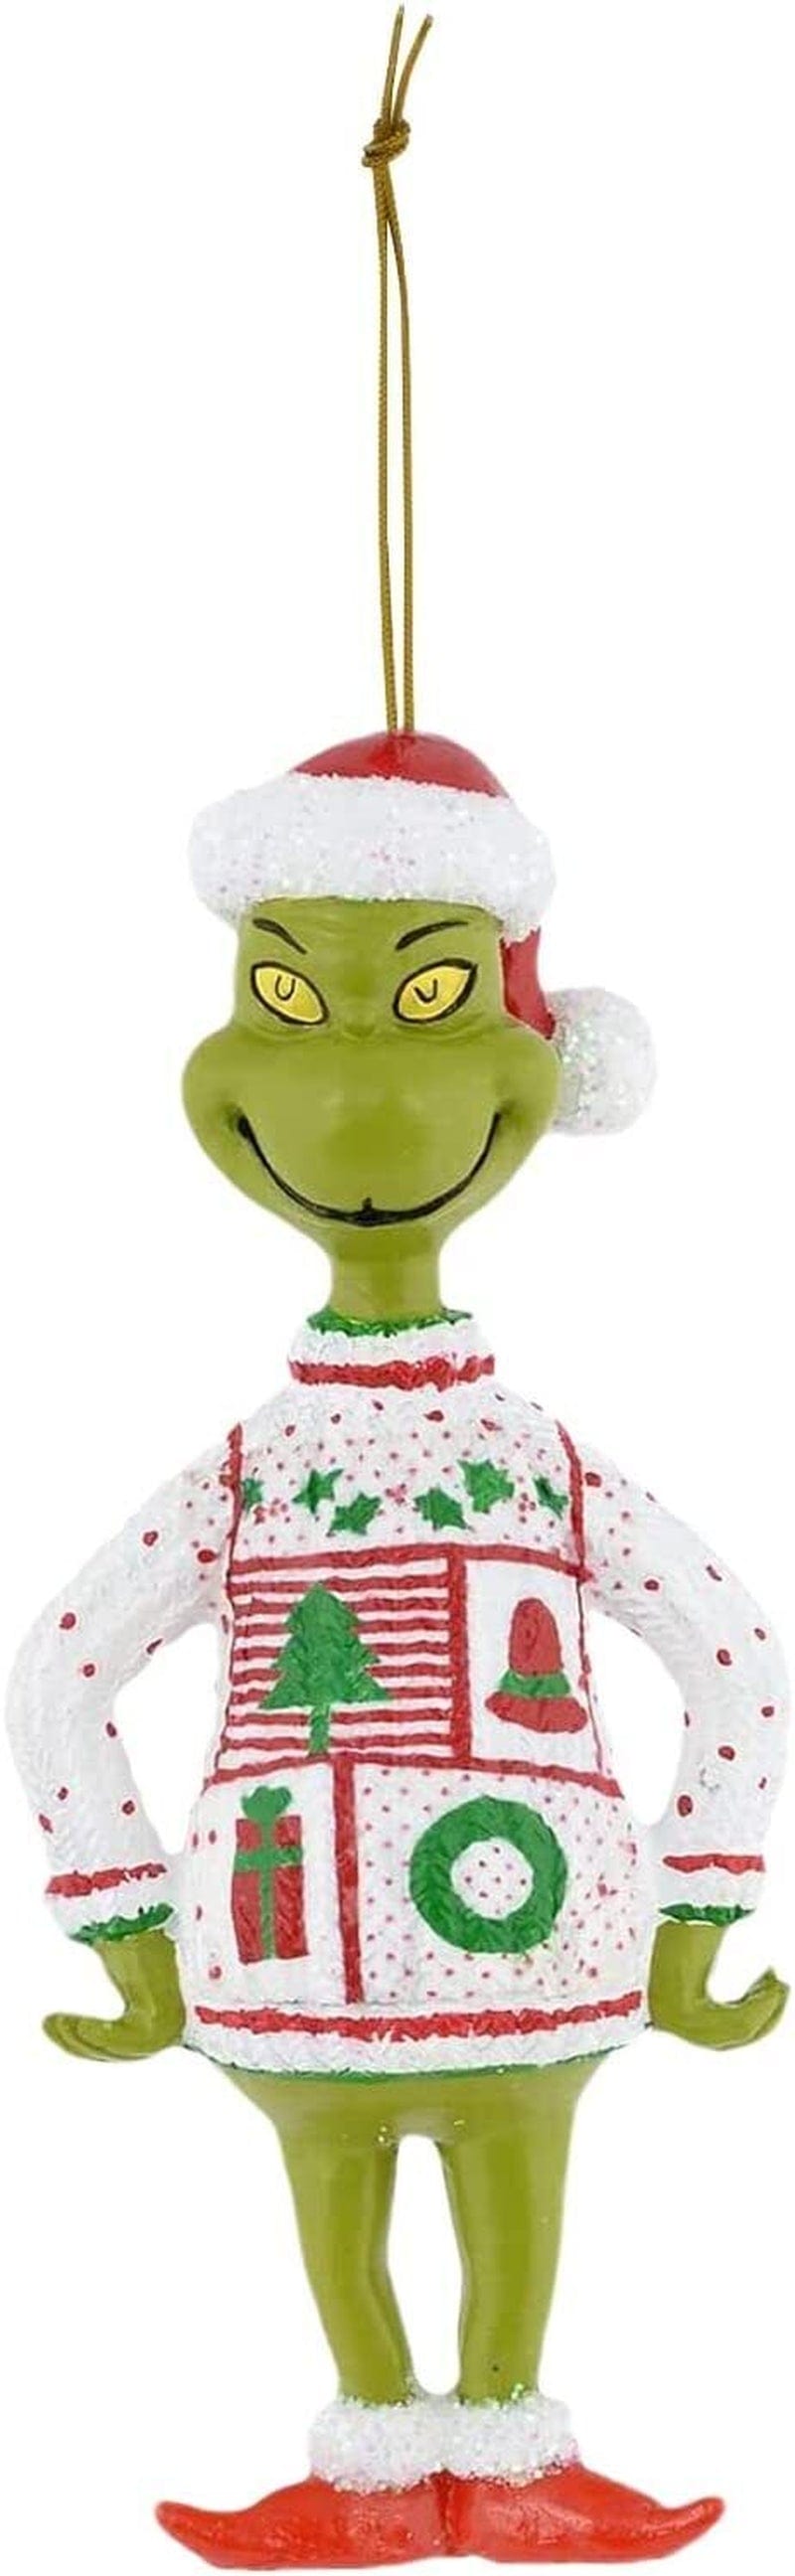 Christmas Grinch Ornaments,Grinch Stole Christmas,Grinch Decorations for Christmas Tree,Merry Christmas Hanging Decor  RAML   